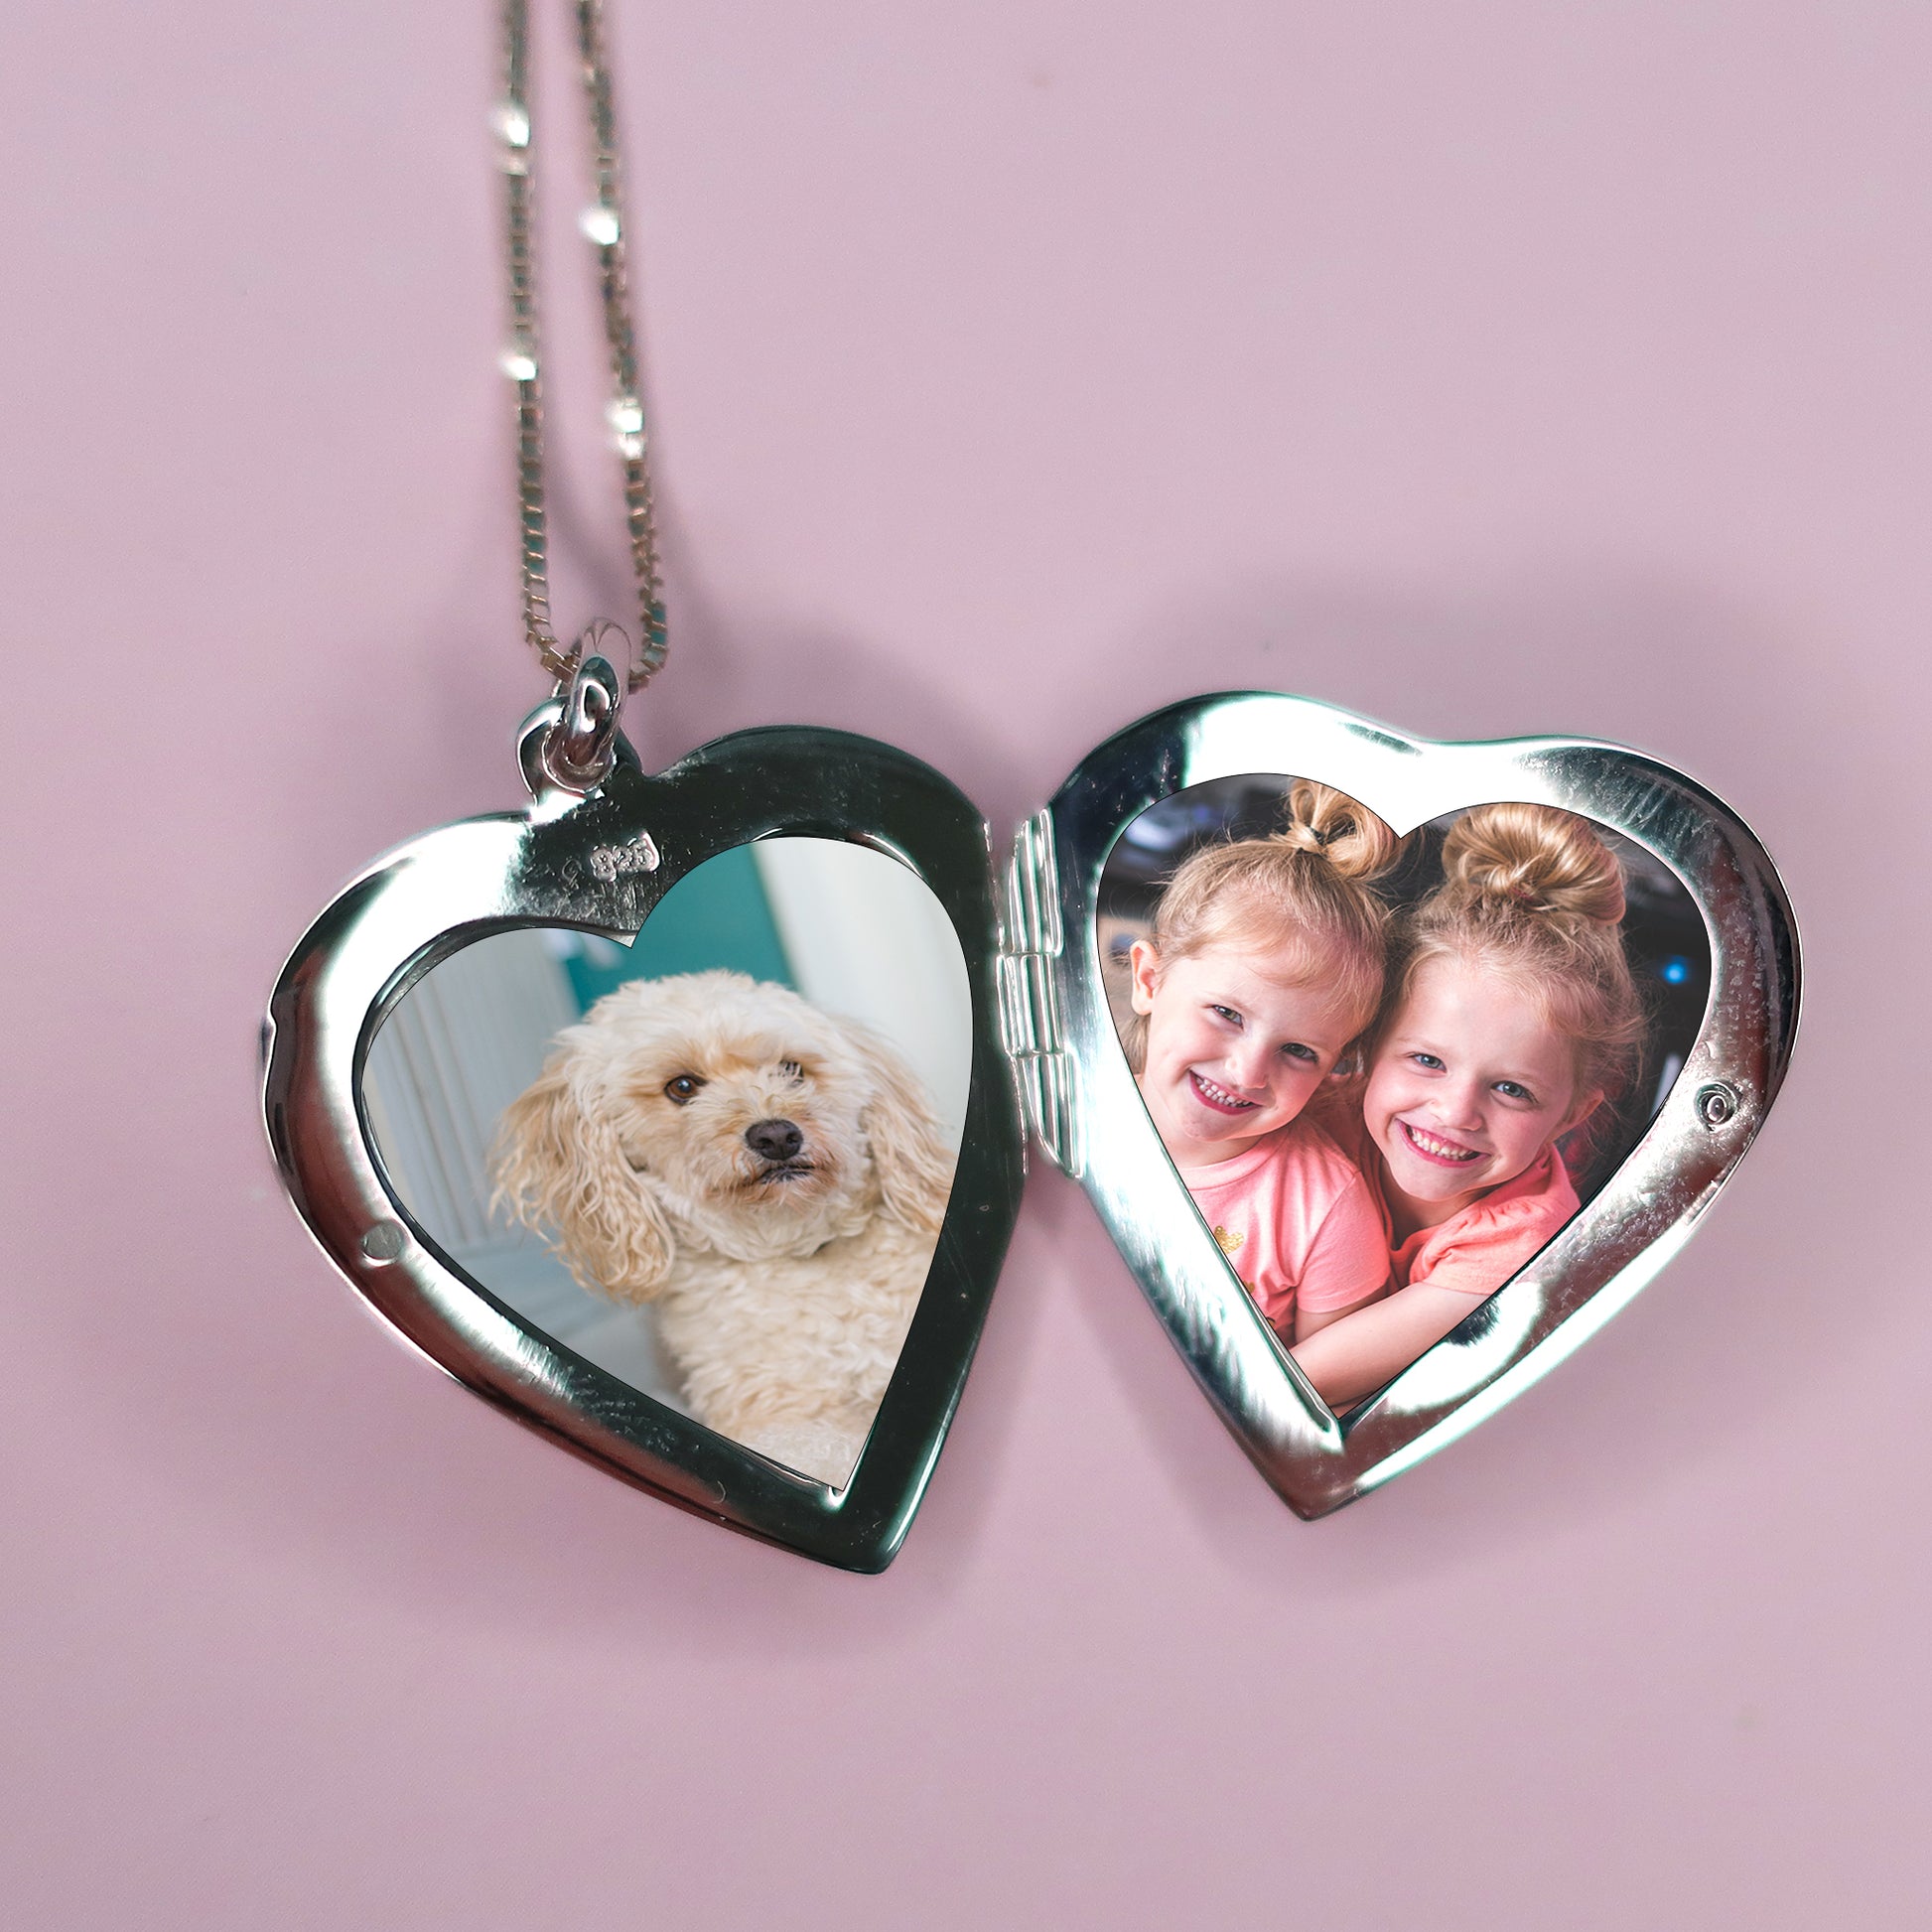 heart shaped locket showing photos of two little girls and dog